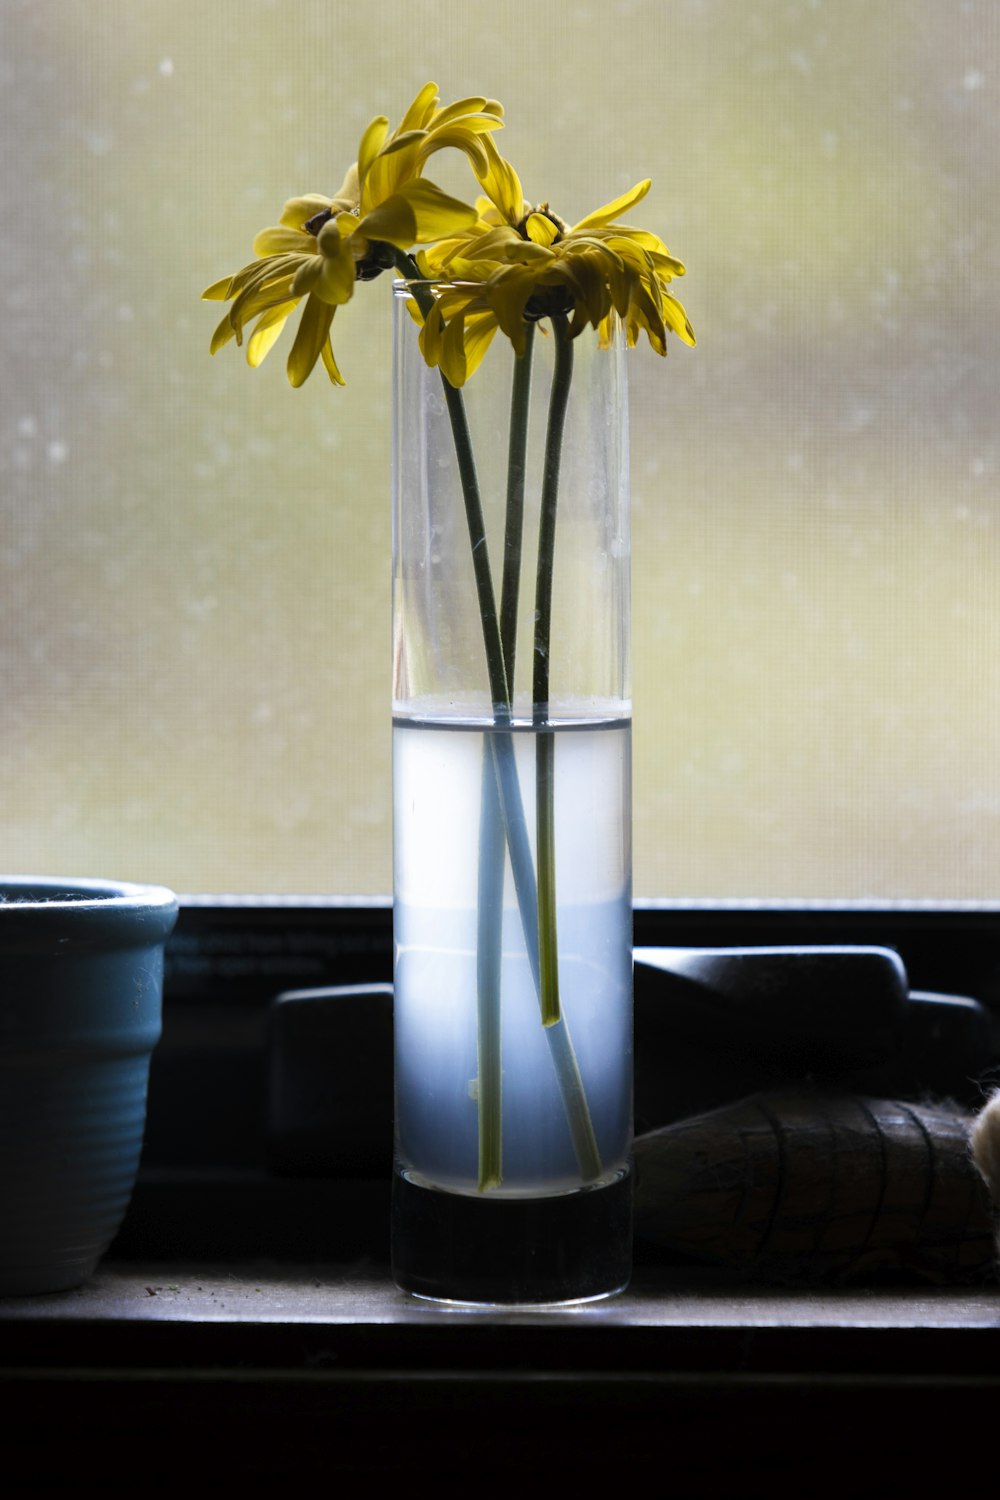 a vase filled with yellow flowers sitting on a window sill